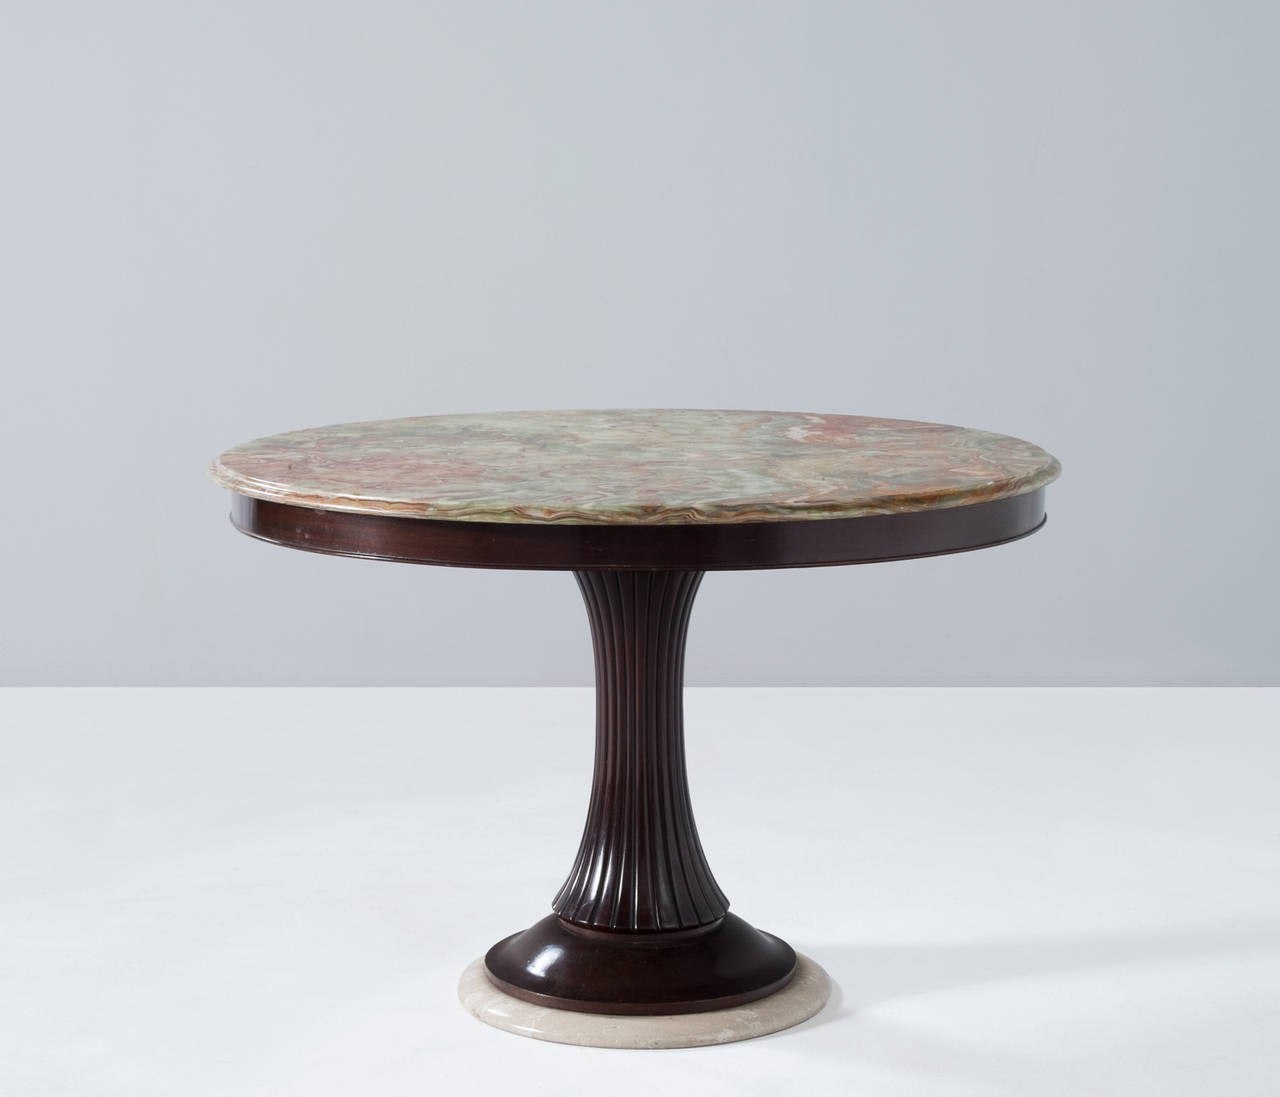 Center table, in wood and marble, by Osvaldo Borsani for Arredamento Borsani, Italy 1950s. 

A very nice dining table by Osvaldo Borsani for Arredamento Borsani. This distinctive center table was made circa in the 1950s and holds a wooden shaft and